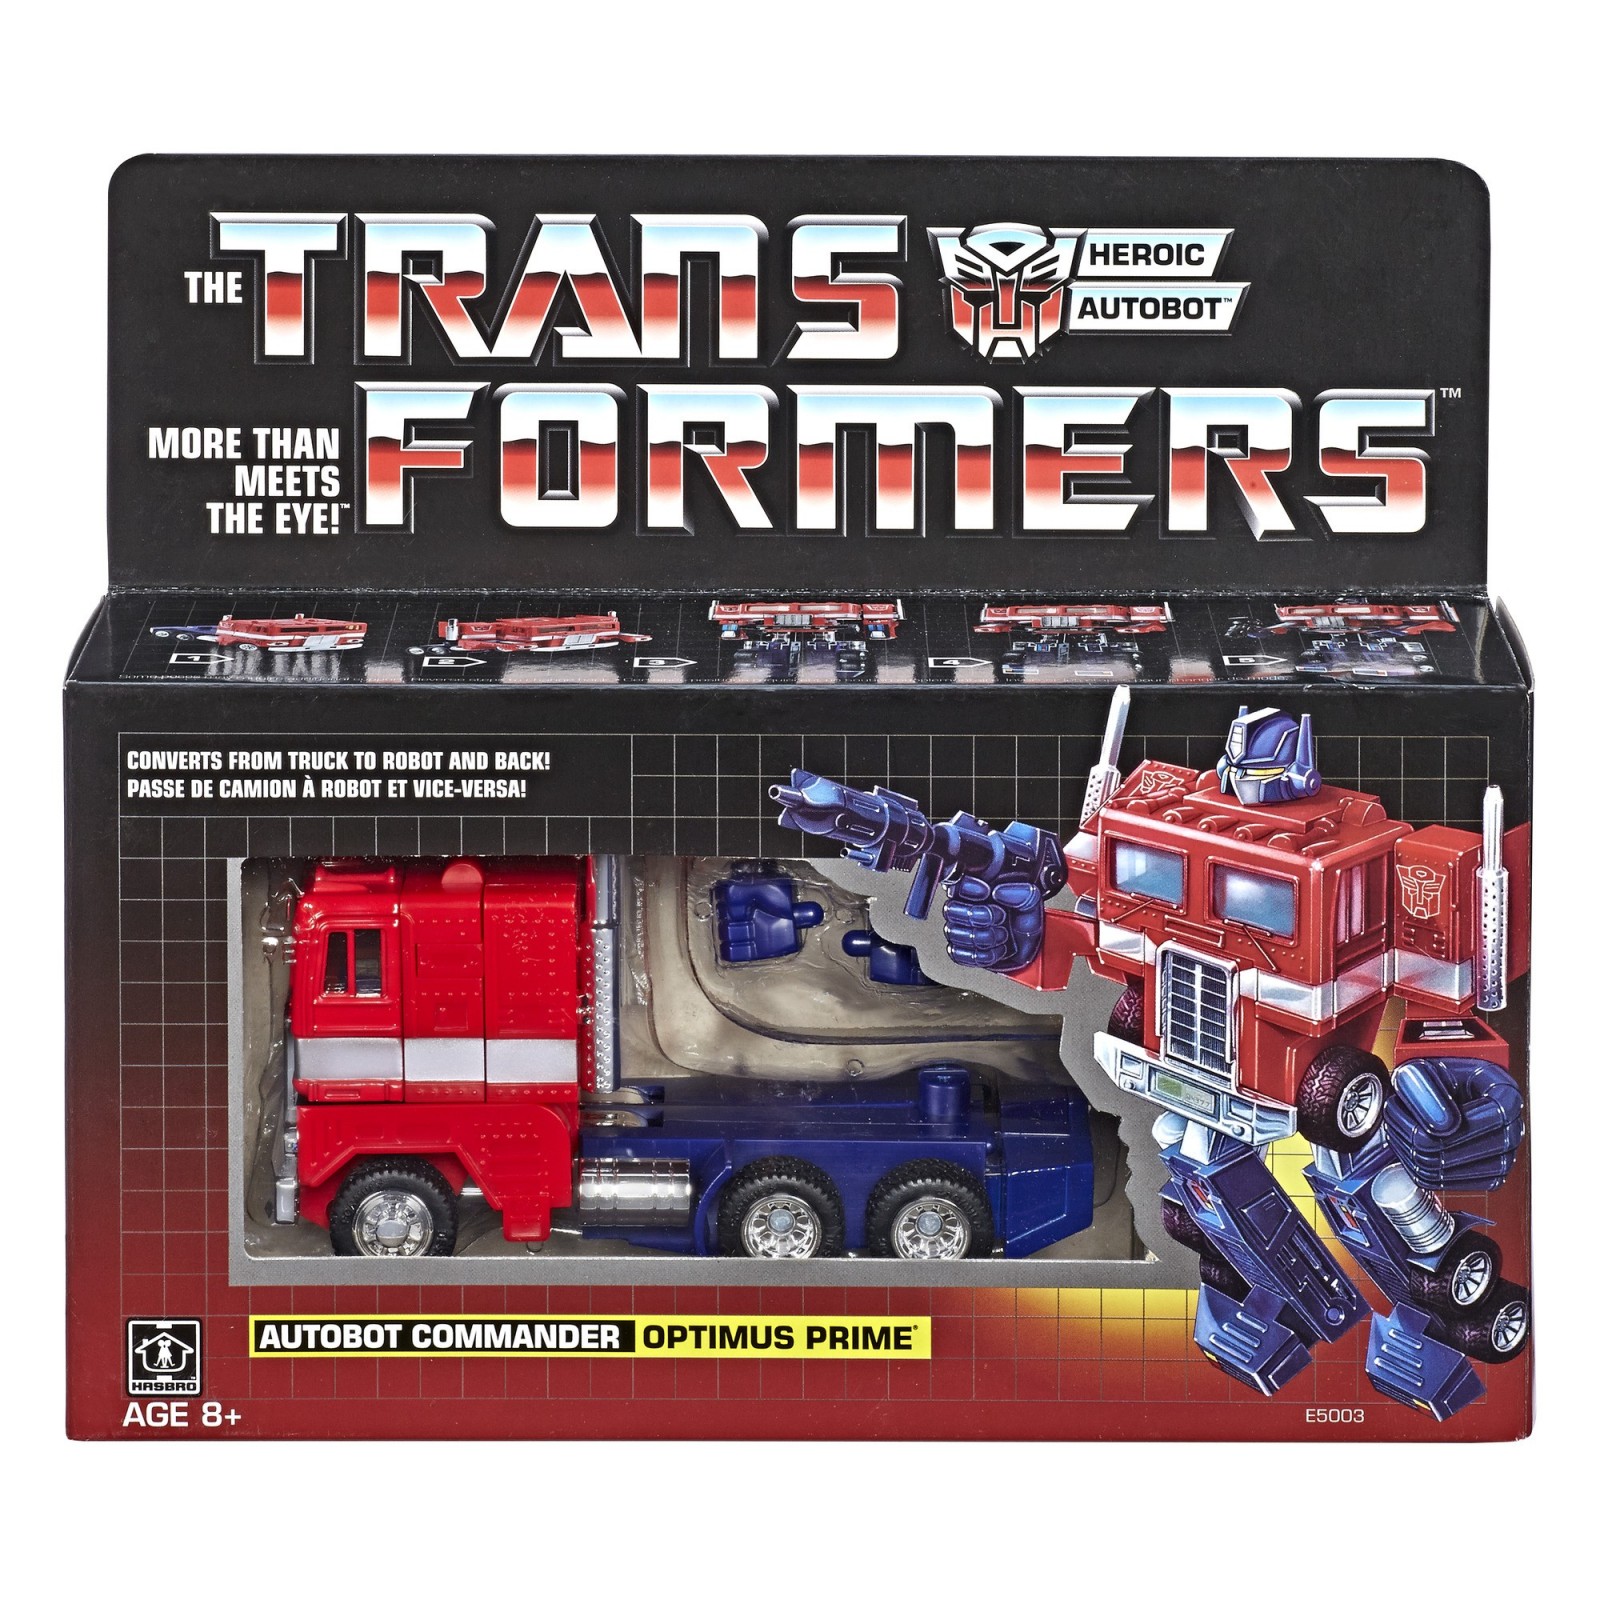 Transformers News: Transformers G1 Optimus Prime Reissue Marked Down to Just $25 at Walmart.com